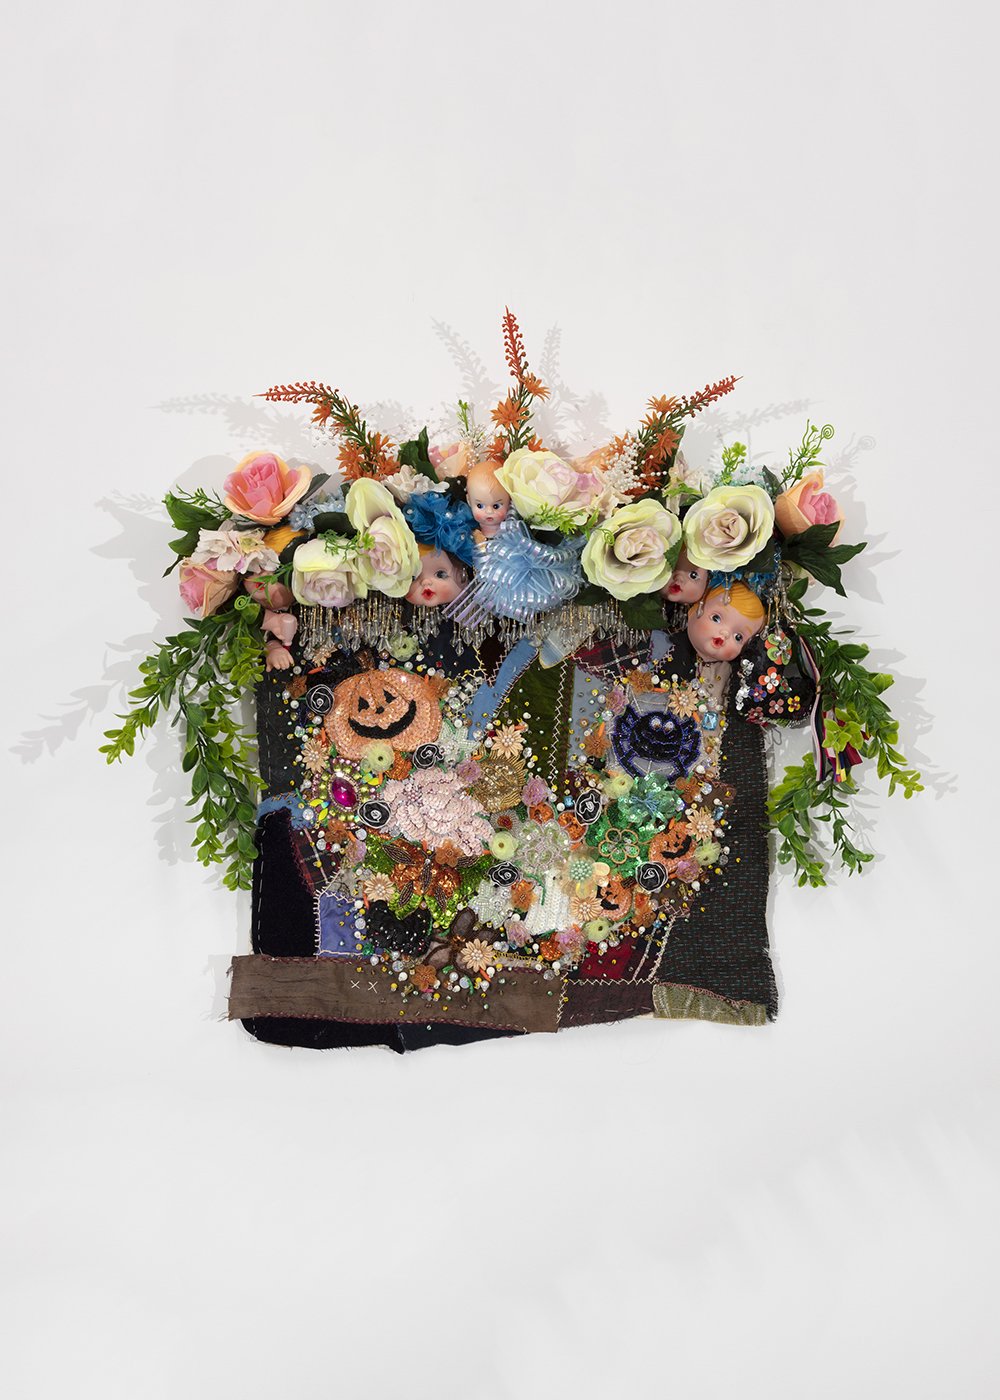   Shroud #6 (study),  2022, Found ‘Crazy’ quilt ca. 1900, trim, fabric flowers, garland, dolls, costume jewelry, buttons, plastic flowers and fauna, beads, sequins, thread, fabric, pine, 27 x 28 x 5” 